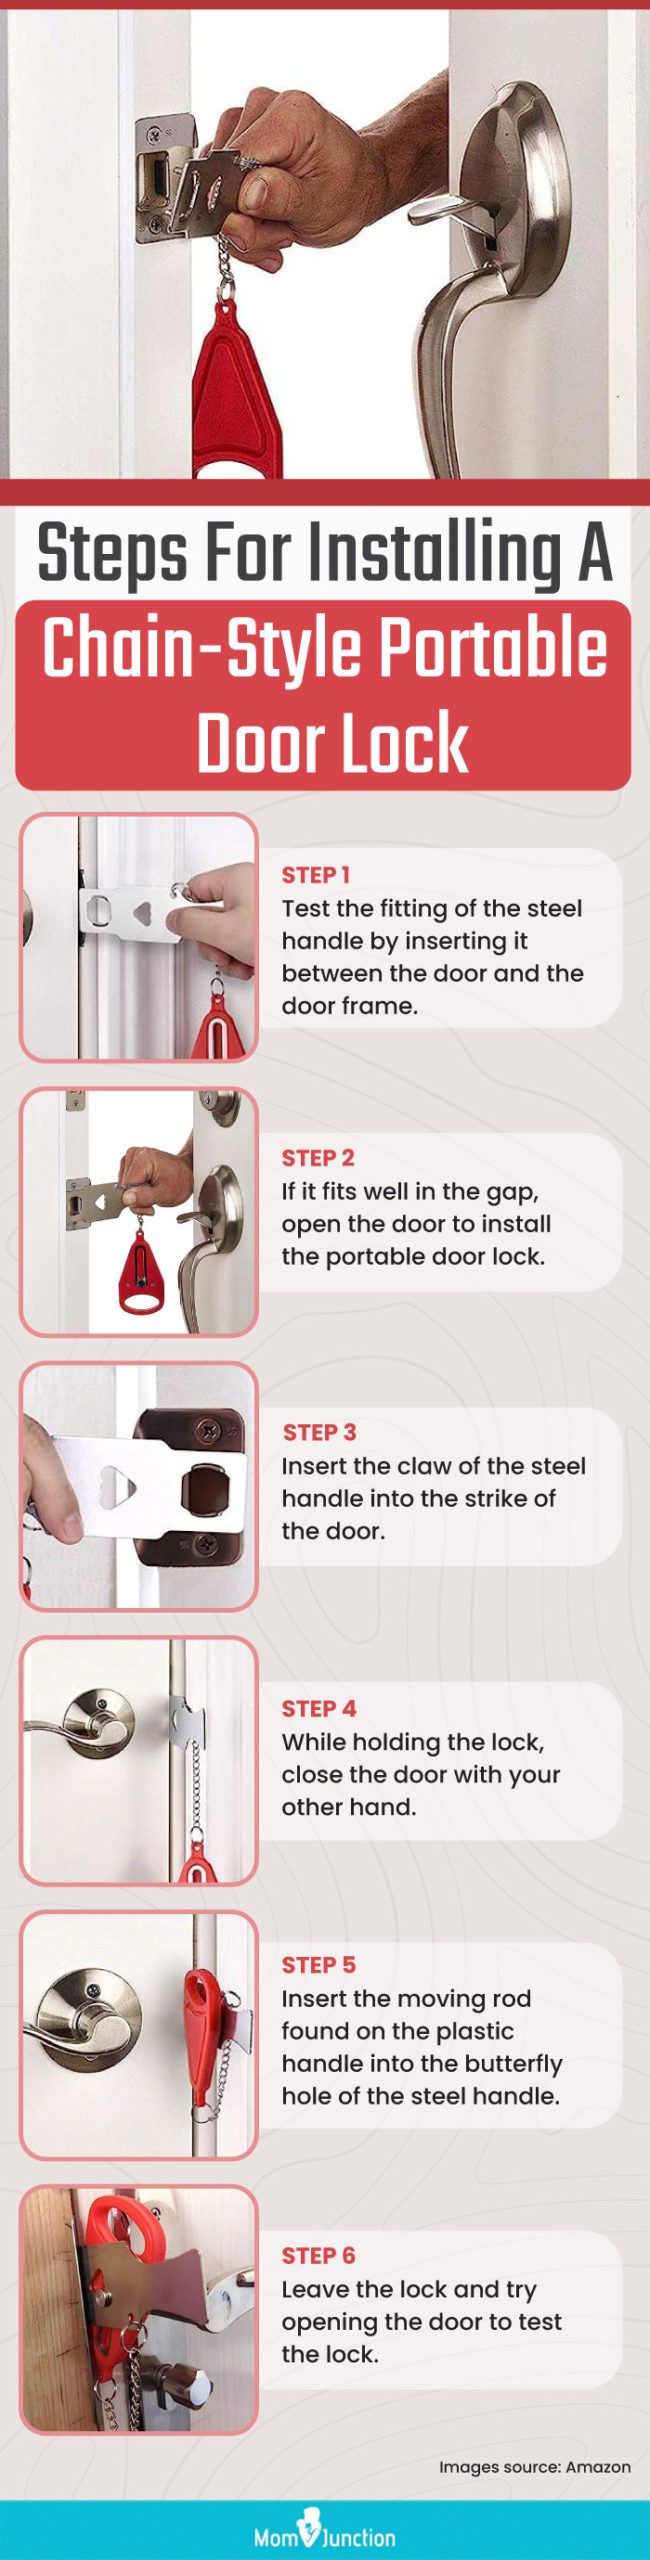 Steps For Installing A Chain Style Portable Door Lock (infographic)